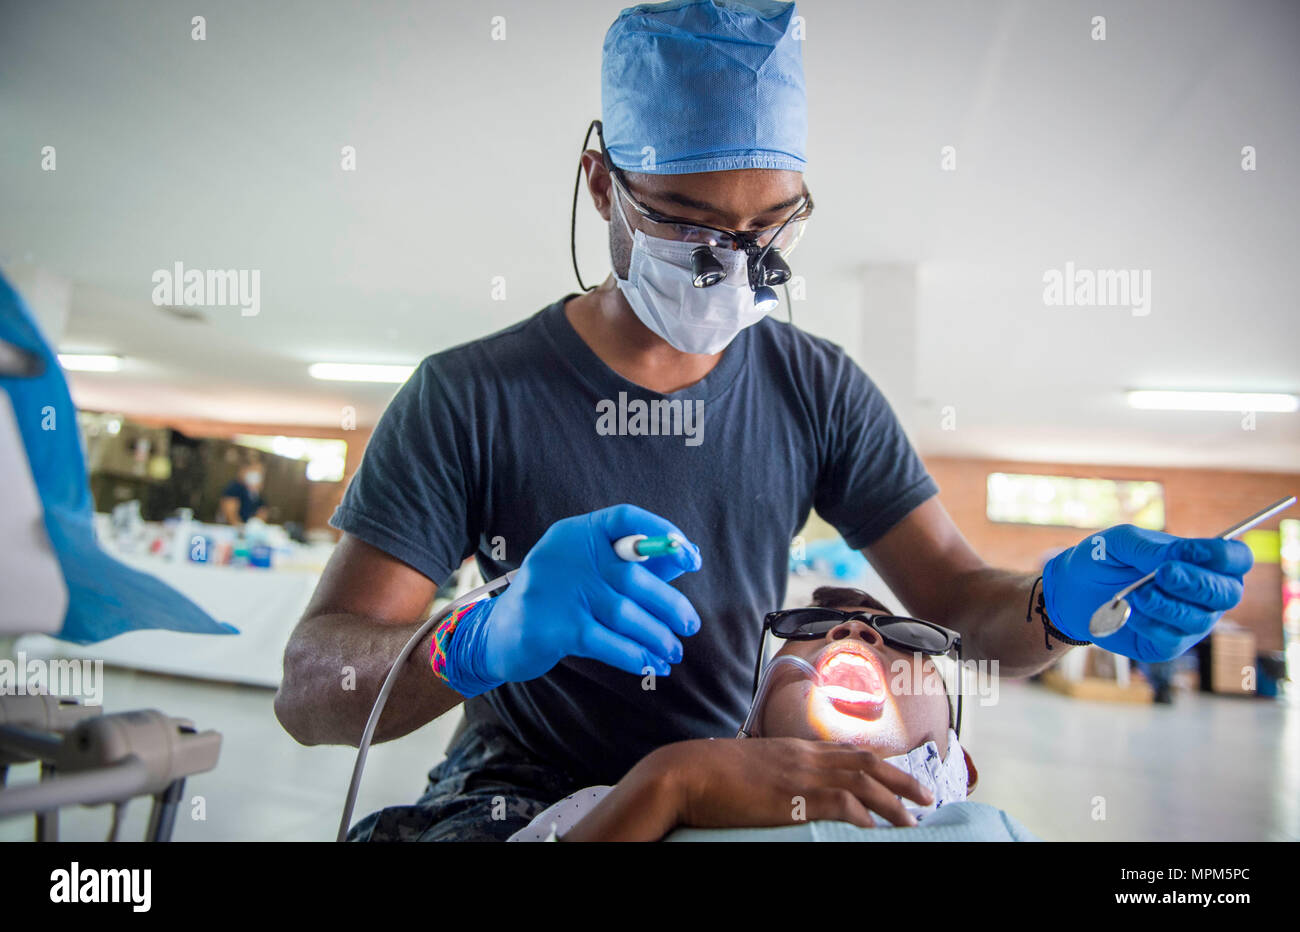 170325-N-YL073-305 MAYAPO, Colombia (March 25, 2017) - Hospitalman Billy Gibson, a native of Barnsville, Ga., attached to Naval Hospital Pensacola, Fla., performs a teeth cleaning at the Continuing Promise 2017 (CP-17) medical site in Mayapo, Colombia. CP-17 is a U.S. Southern Command-sponsored and U.S. Naval Forces Southern Command/U.S. 4th Fleet-conducted deployment to conduct civil-military operations including humanitarian assistance, training engagements, and medical, dental, and veterinary support in an effort to show U.S. support and commitment to Central and South America. (U.S. Navy p Stock Photo